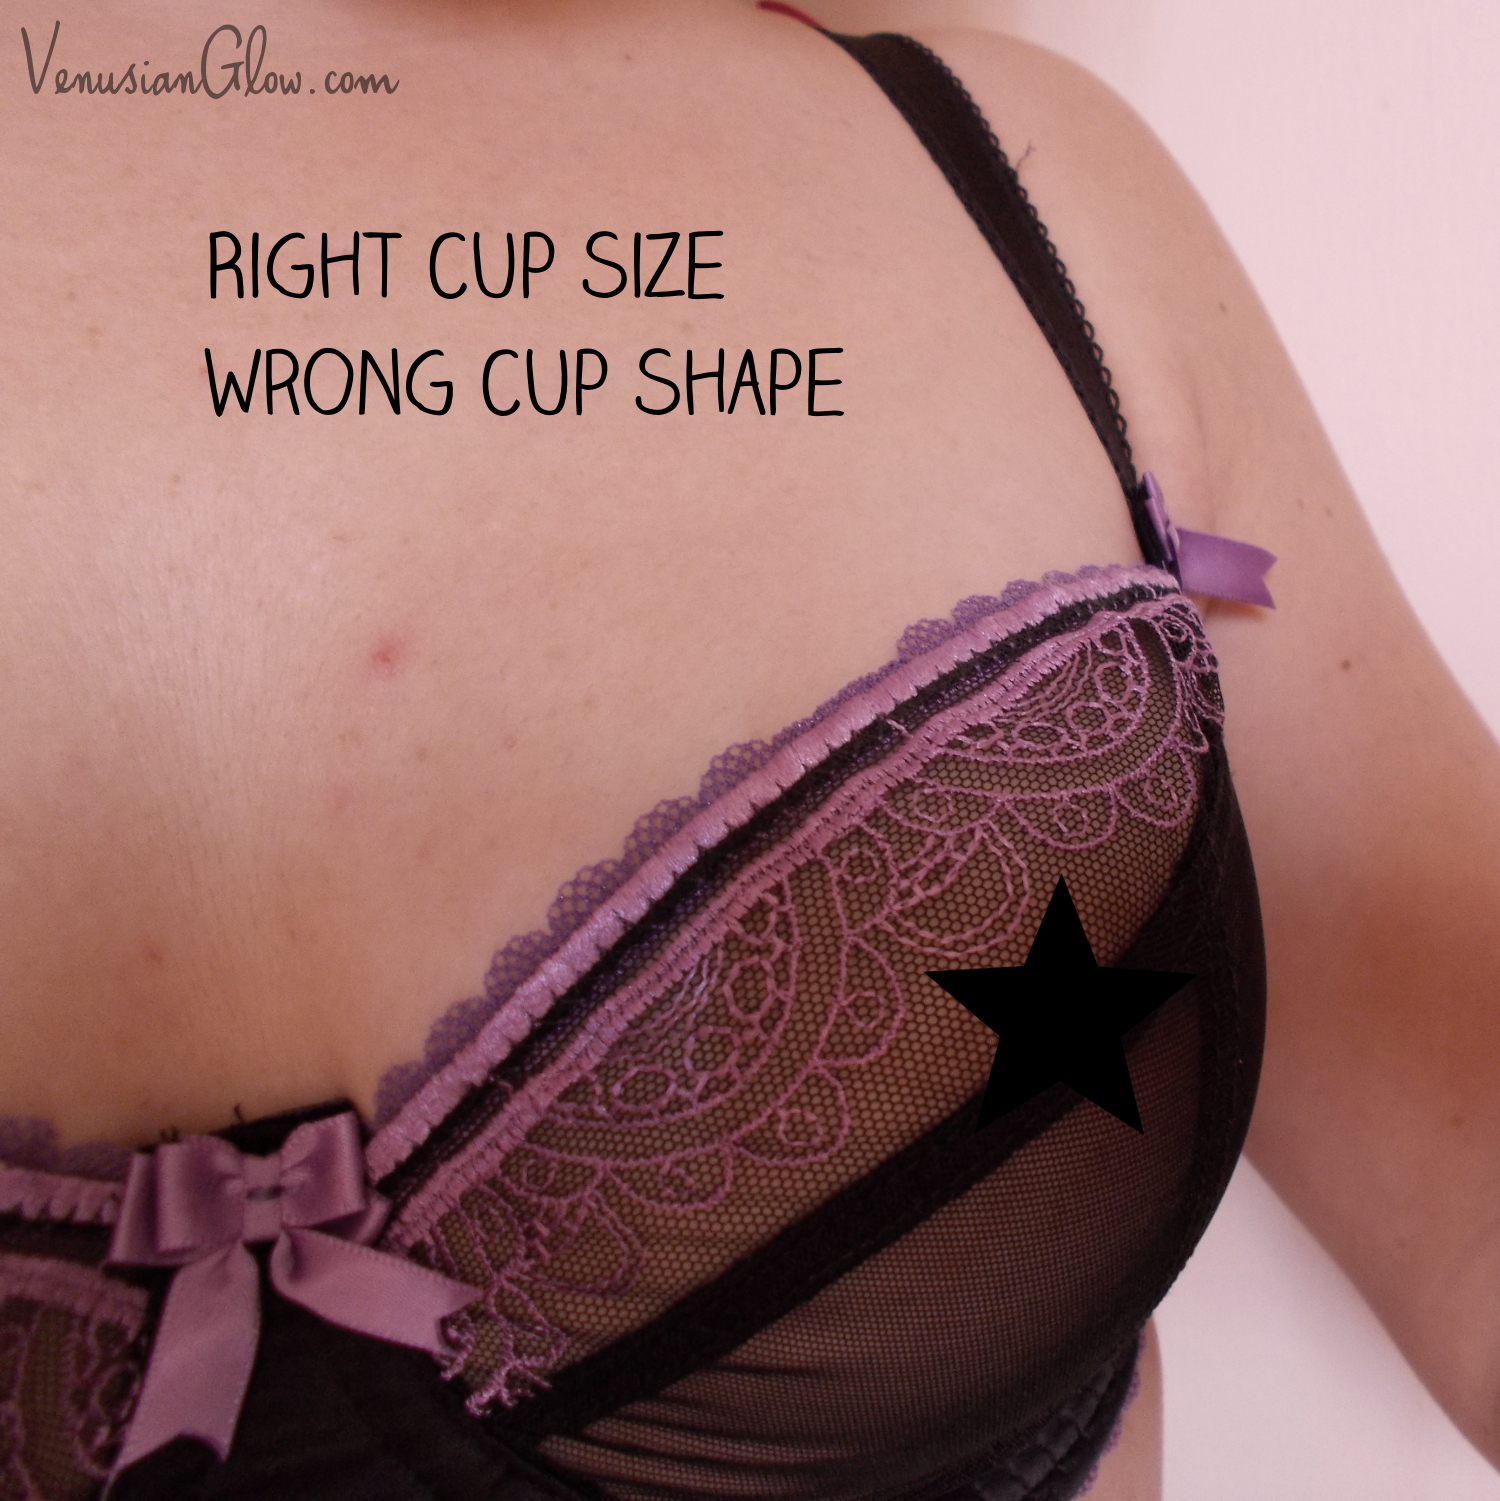 Venusian*Glow: Bra Cup Bottom Puckers And Closed Off Edges -- A